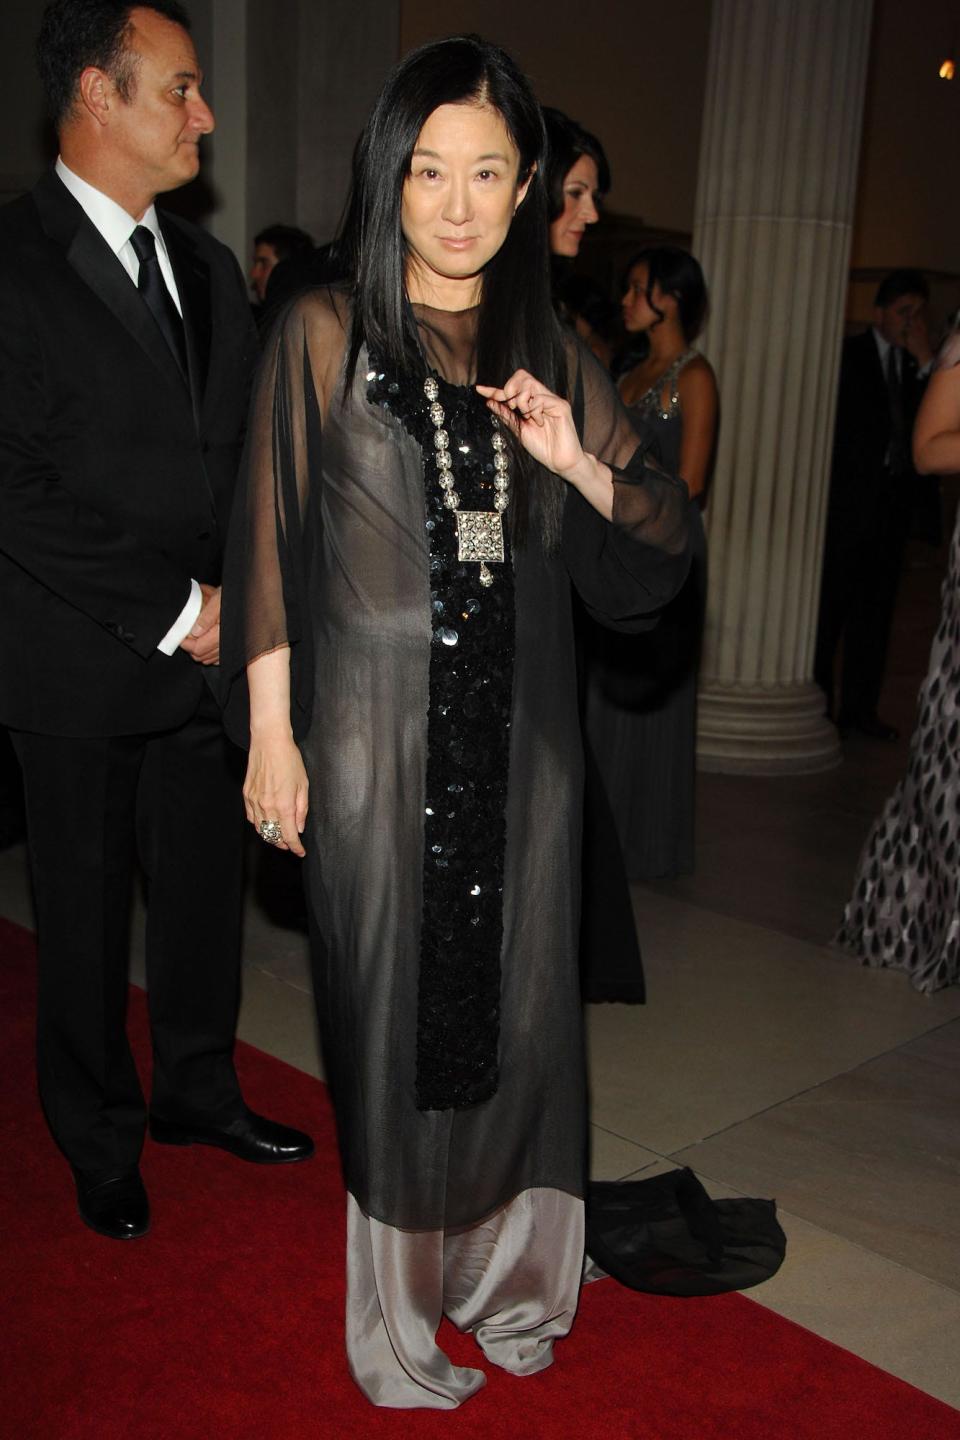 Vera Wang stands on the red carpet at the 2007 Met Gala, wearing a loose gray silk dress, with a black, sheer piece overtop.